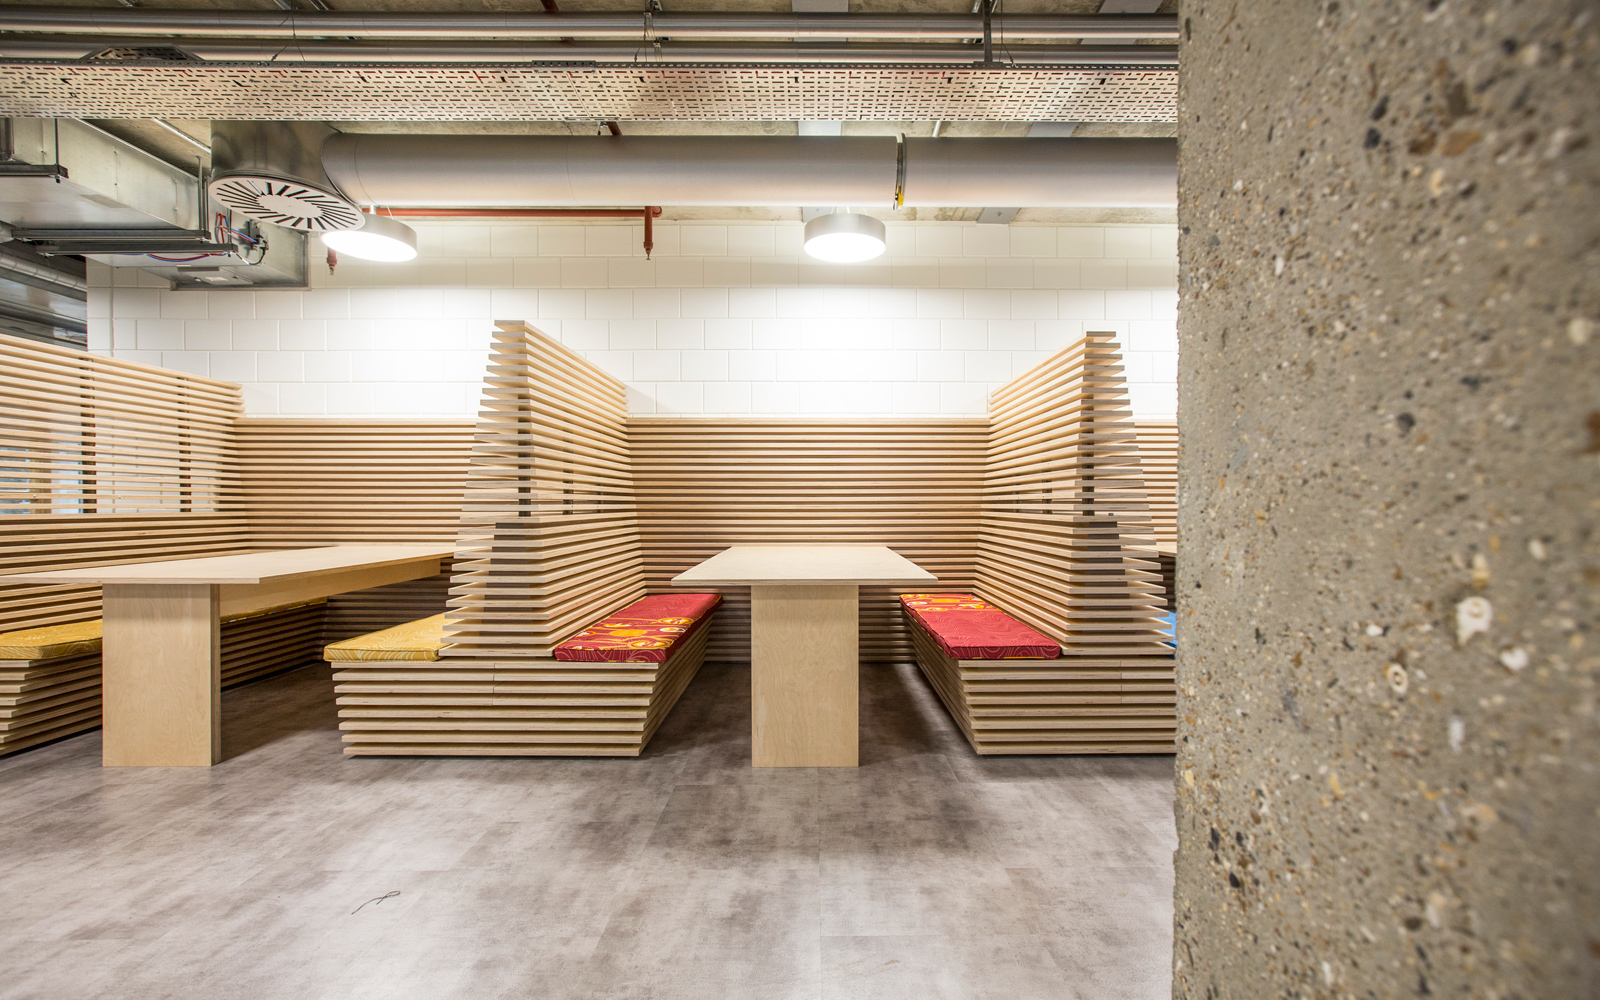 Breakout booths made from slatted plywood